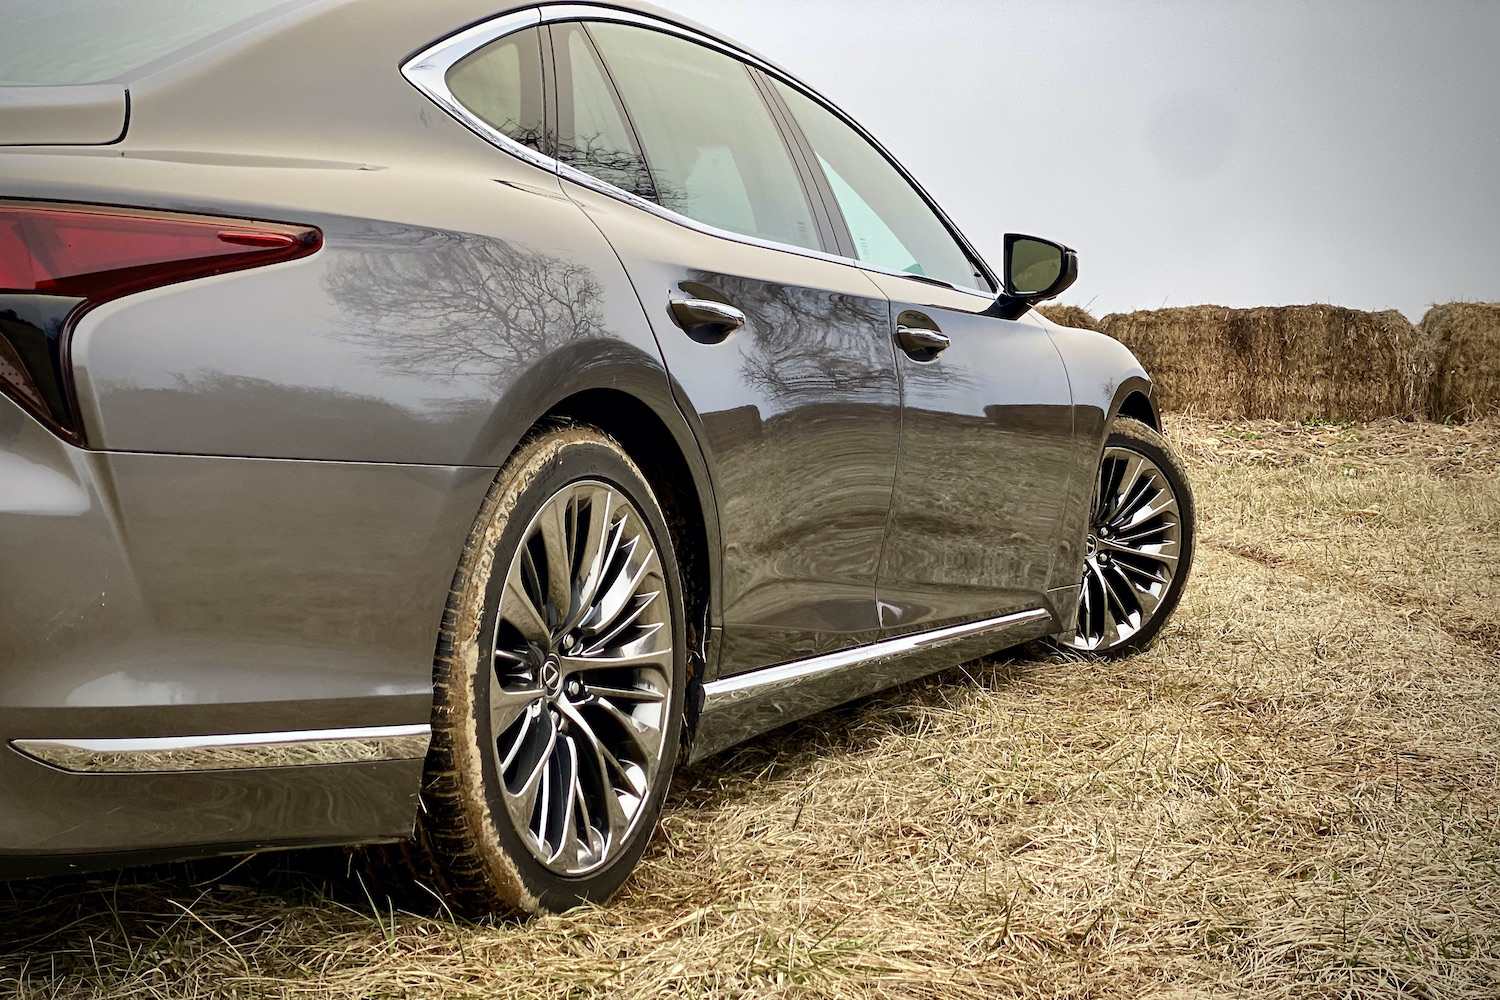 The wheels on the 2021 Lexus LS500 from the side in a grassy field.